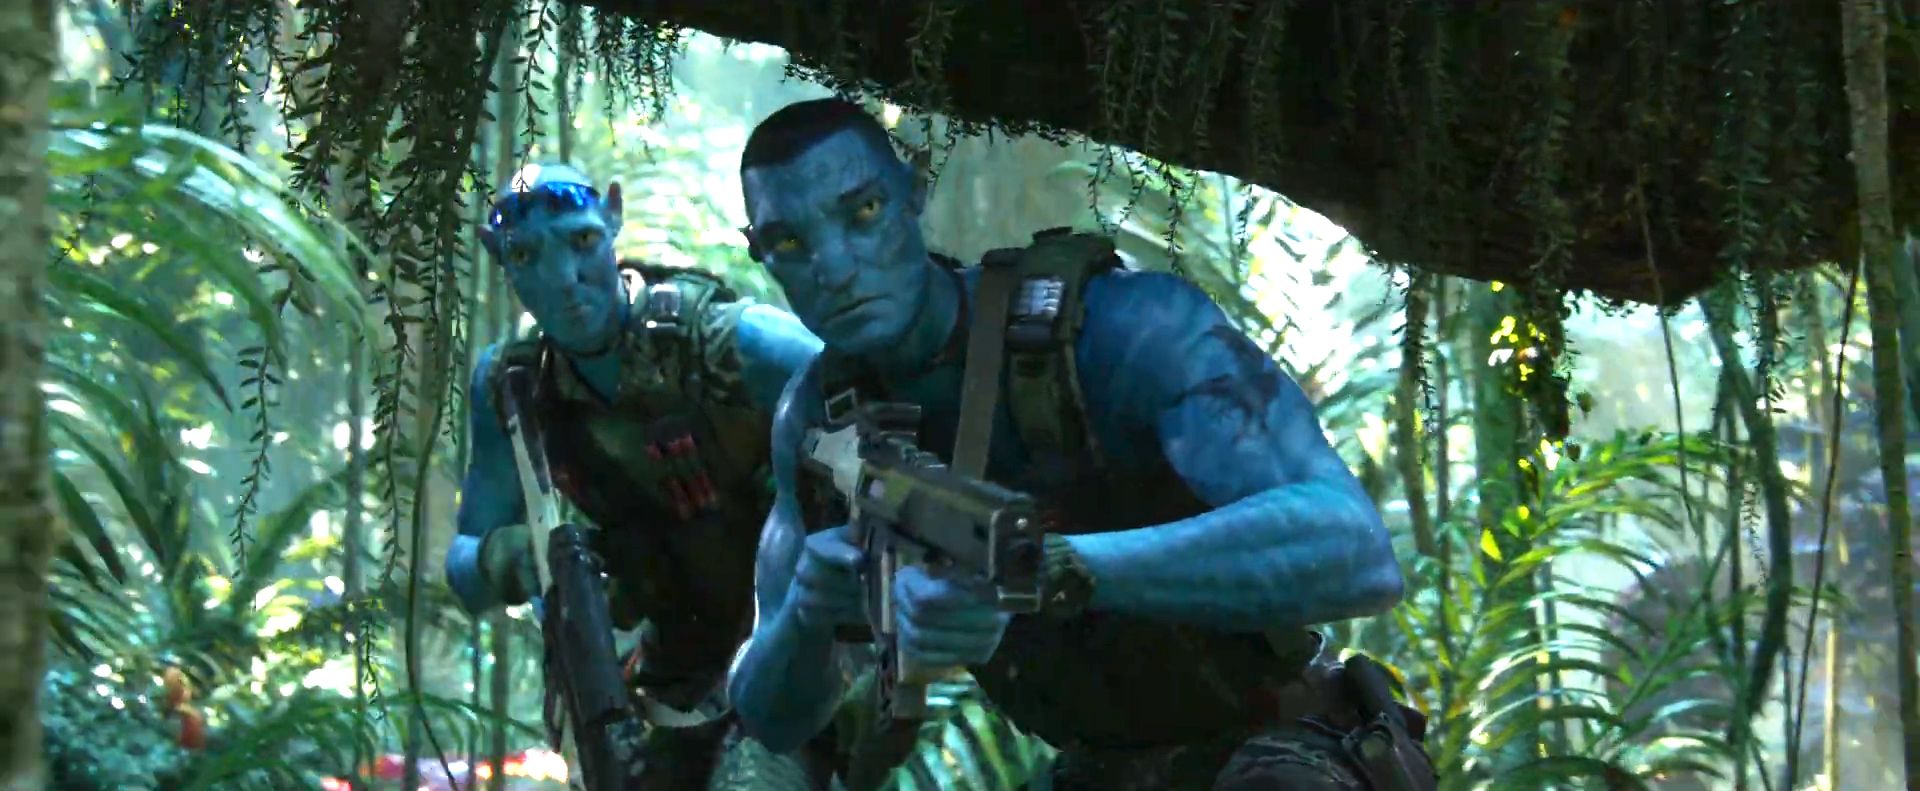 Avatar 2 trailer could reveal how Quaritch returns